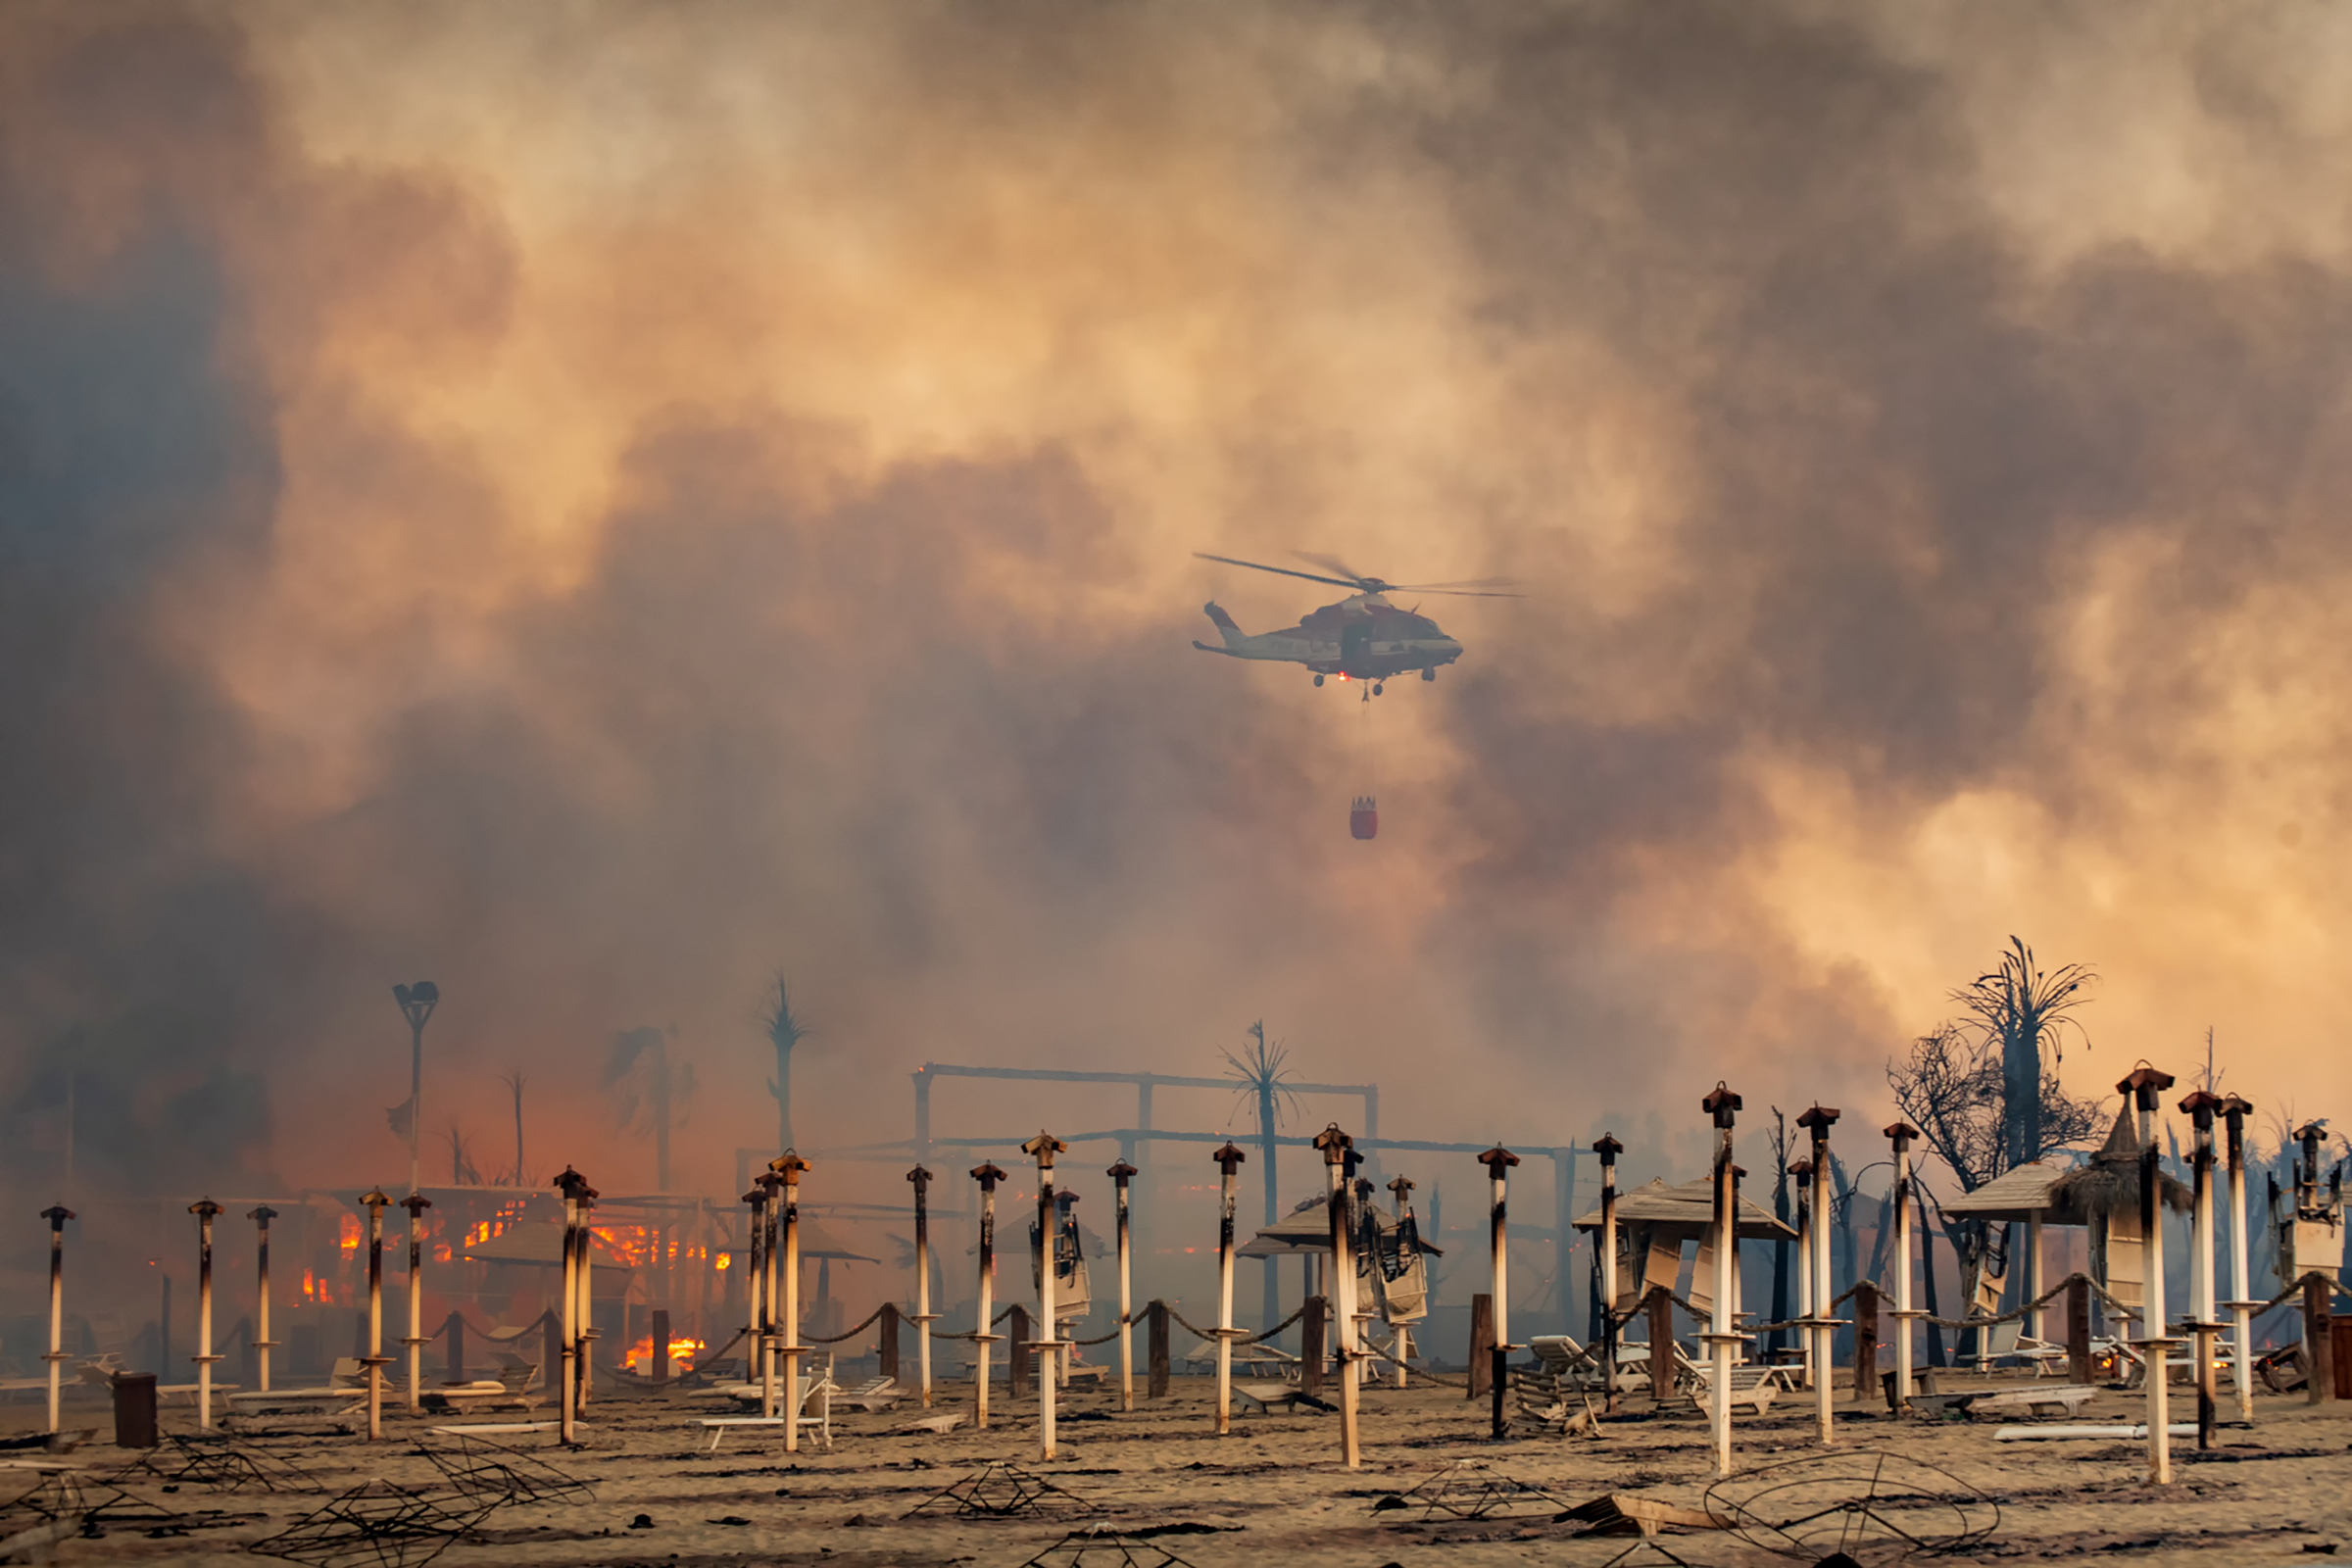 A helicopter flies above a fire at Le Capannine beach in Catania, Sicily, Italy on July 30. (Roberto Viglianisi—Reuters)